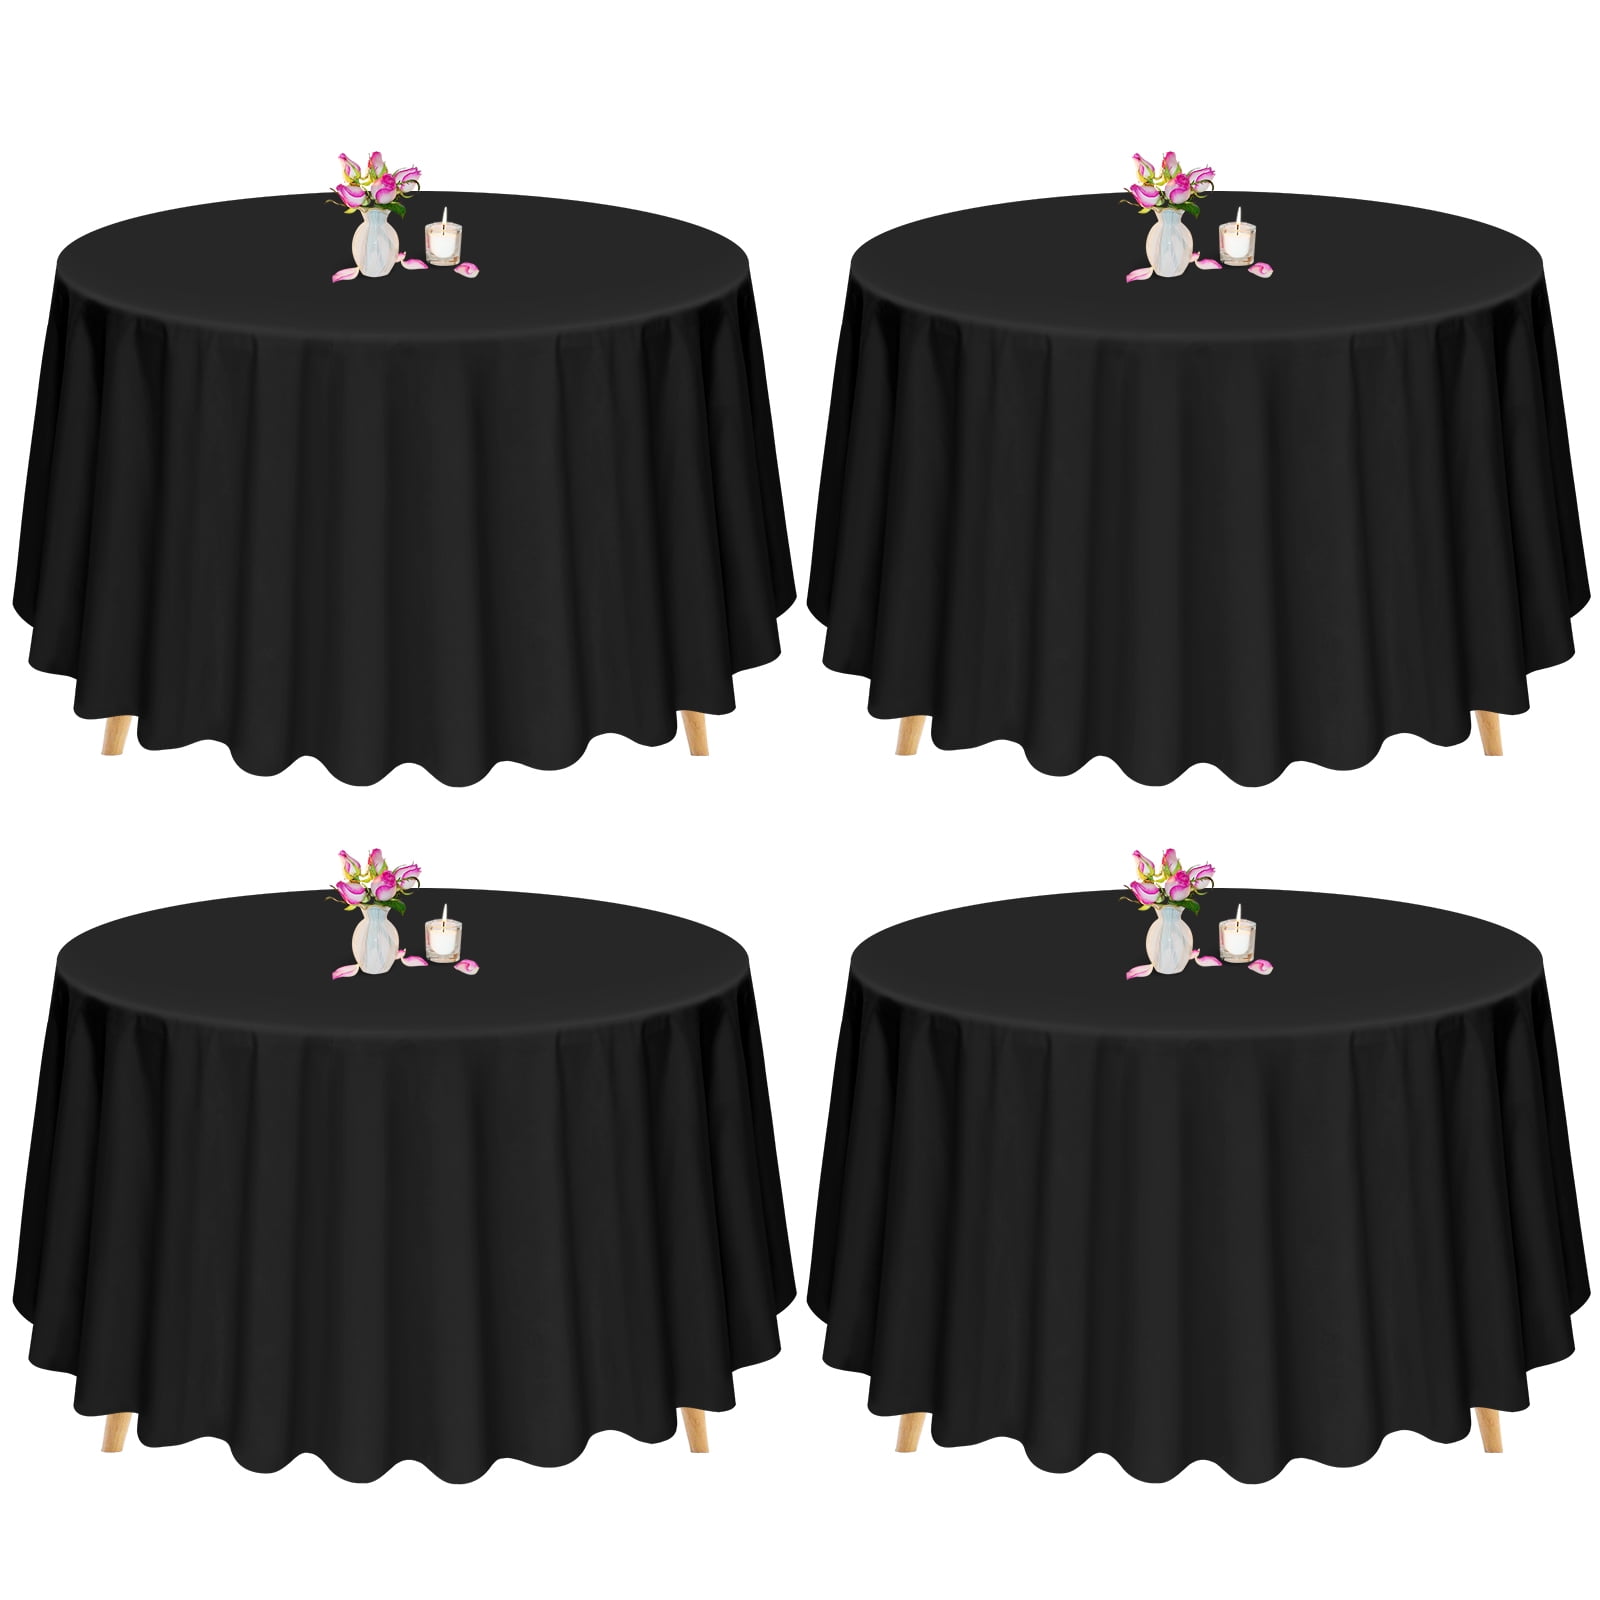 LA Linen 120 in. Black Polyester Poplin Round Tablecloth TCpop120R_BlackP24  - The Home Depot